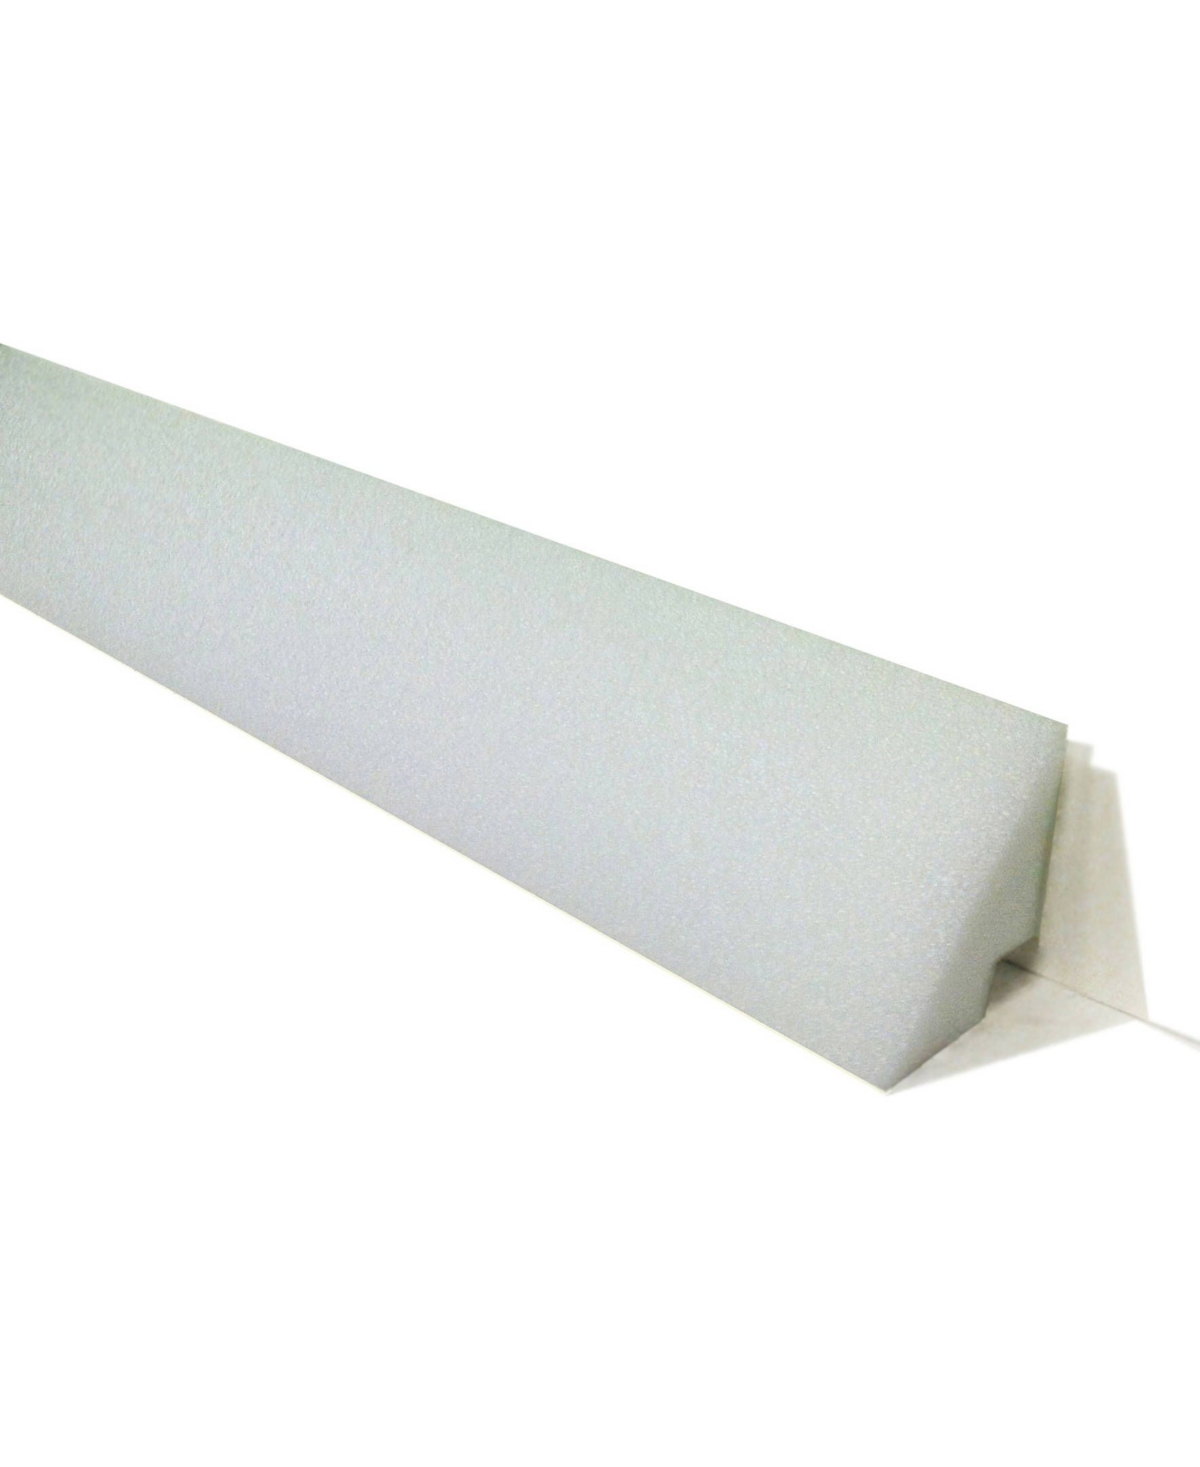 Sports 48" Peel and Stick Above Ground Pool Cover - 15 Pack - White